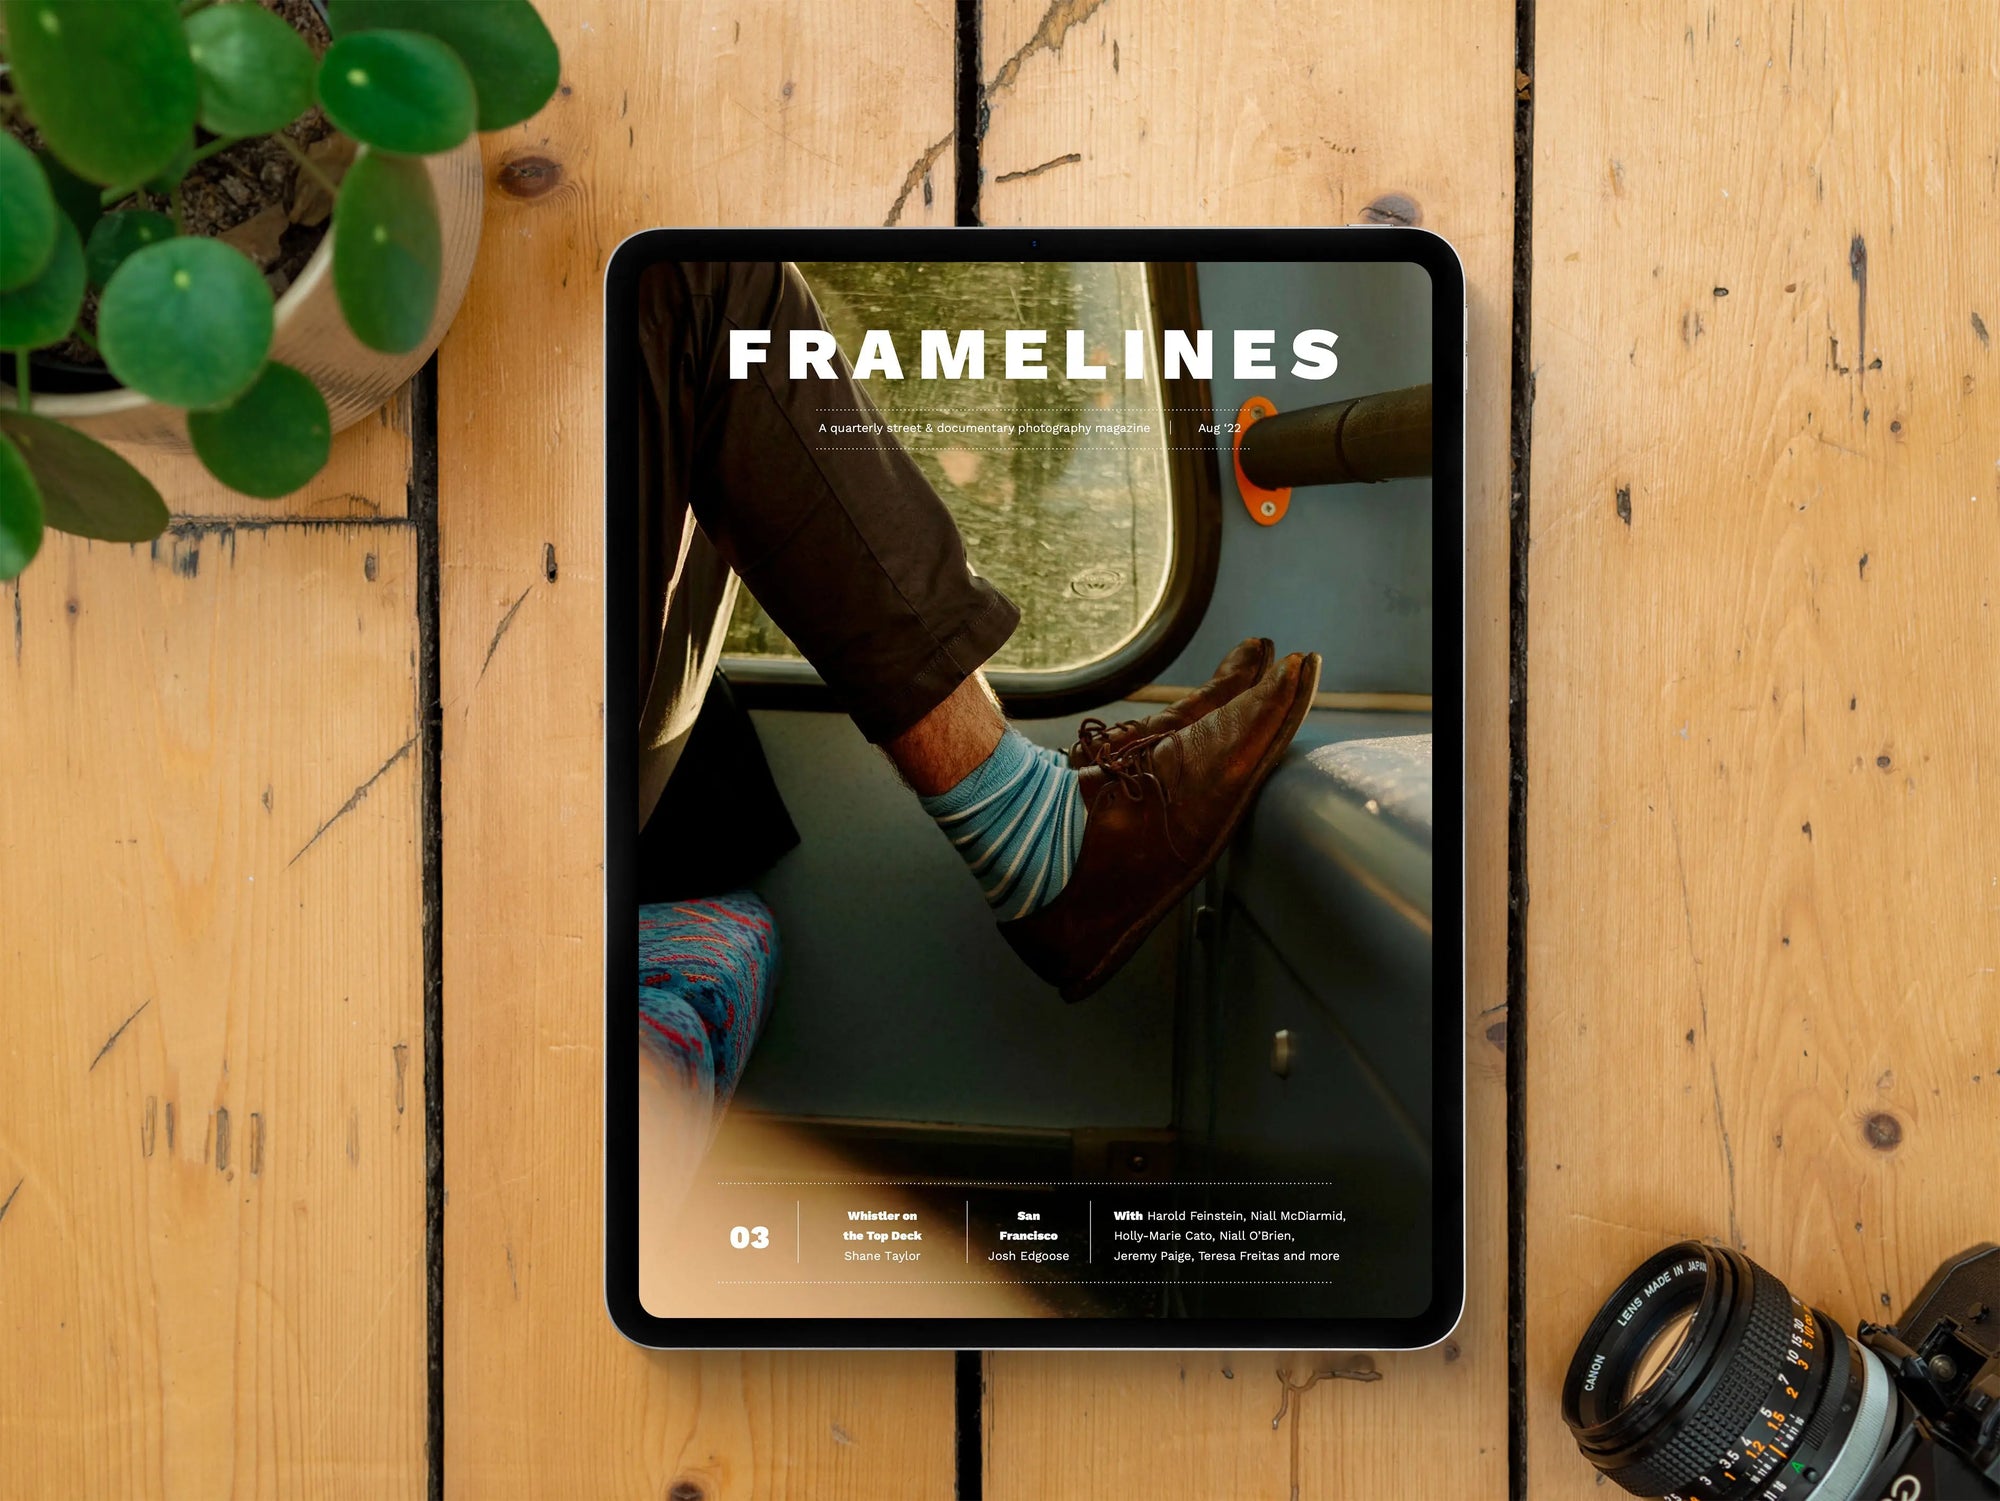 Framelines 03 (Digital Edition) with Harold Feinstein, Jeremy Paige, Niall McDiarmid, Holly-Marie Cato, Teresa Freitas and Niall O'Brien